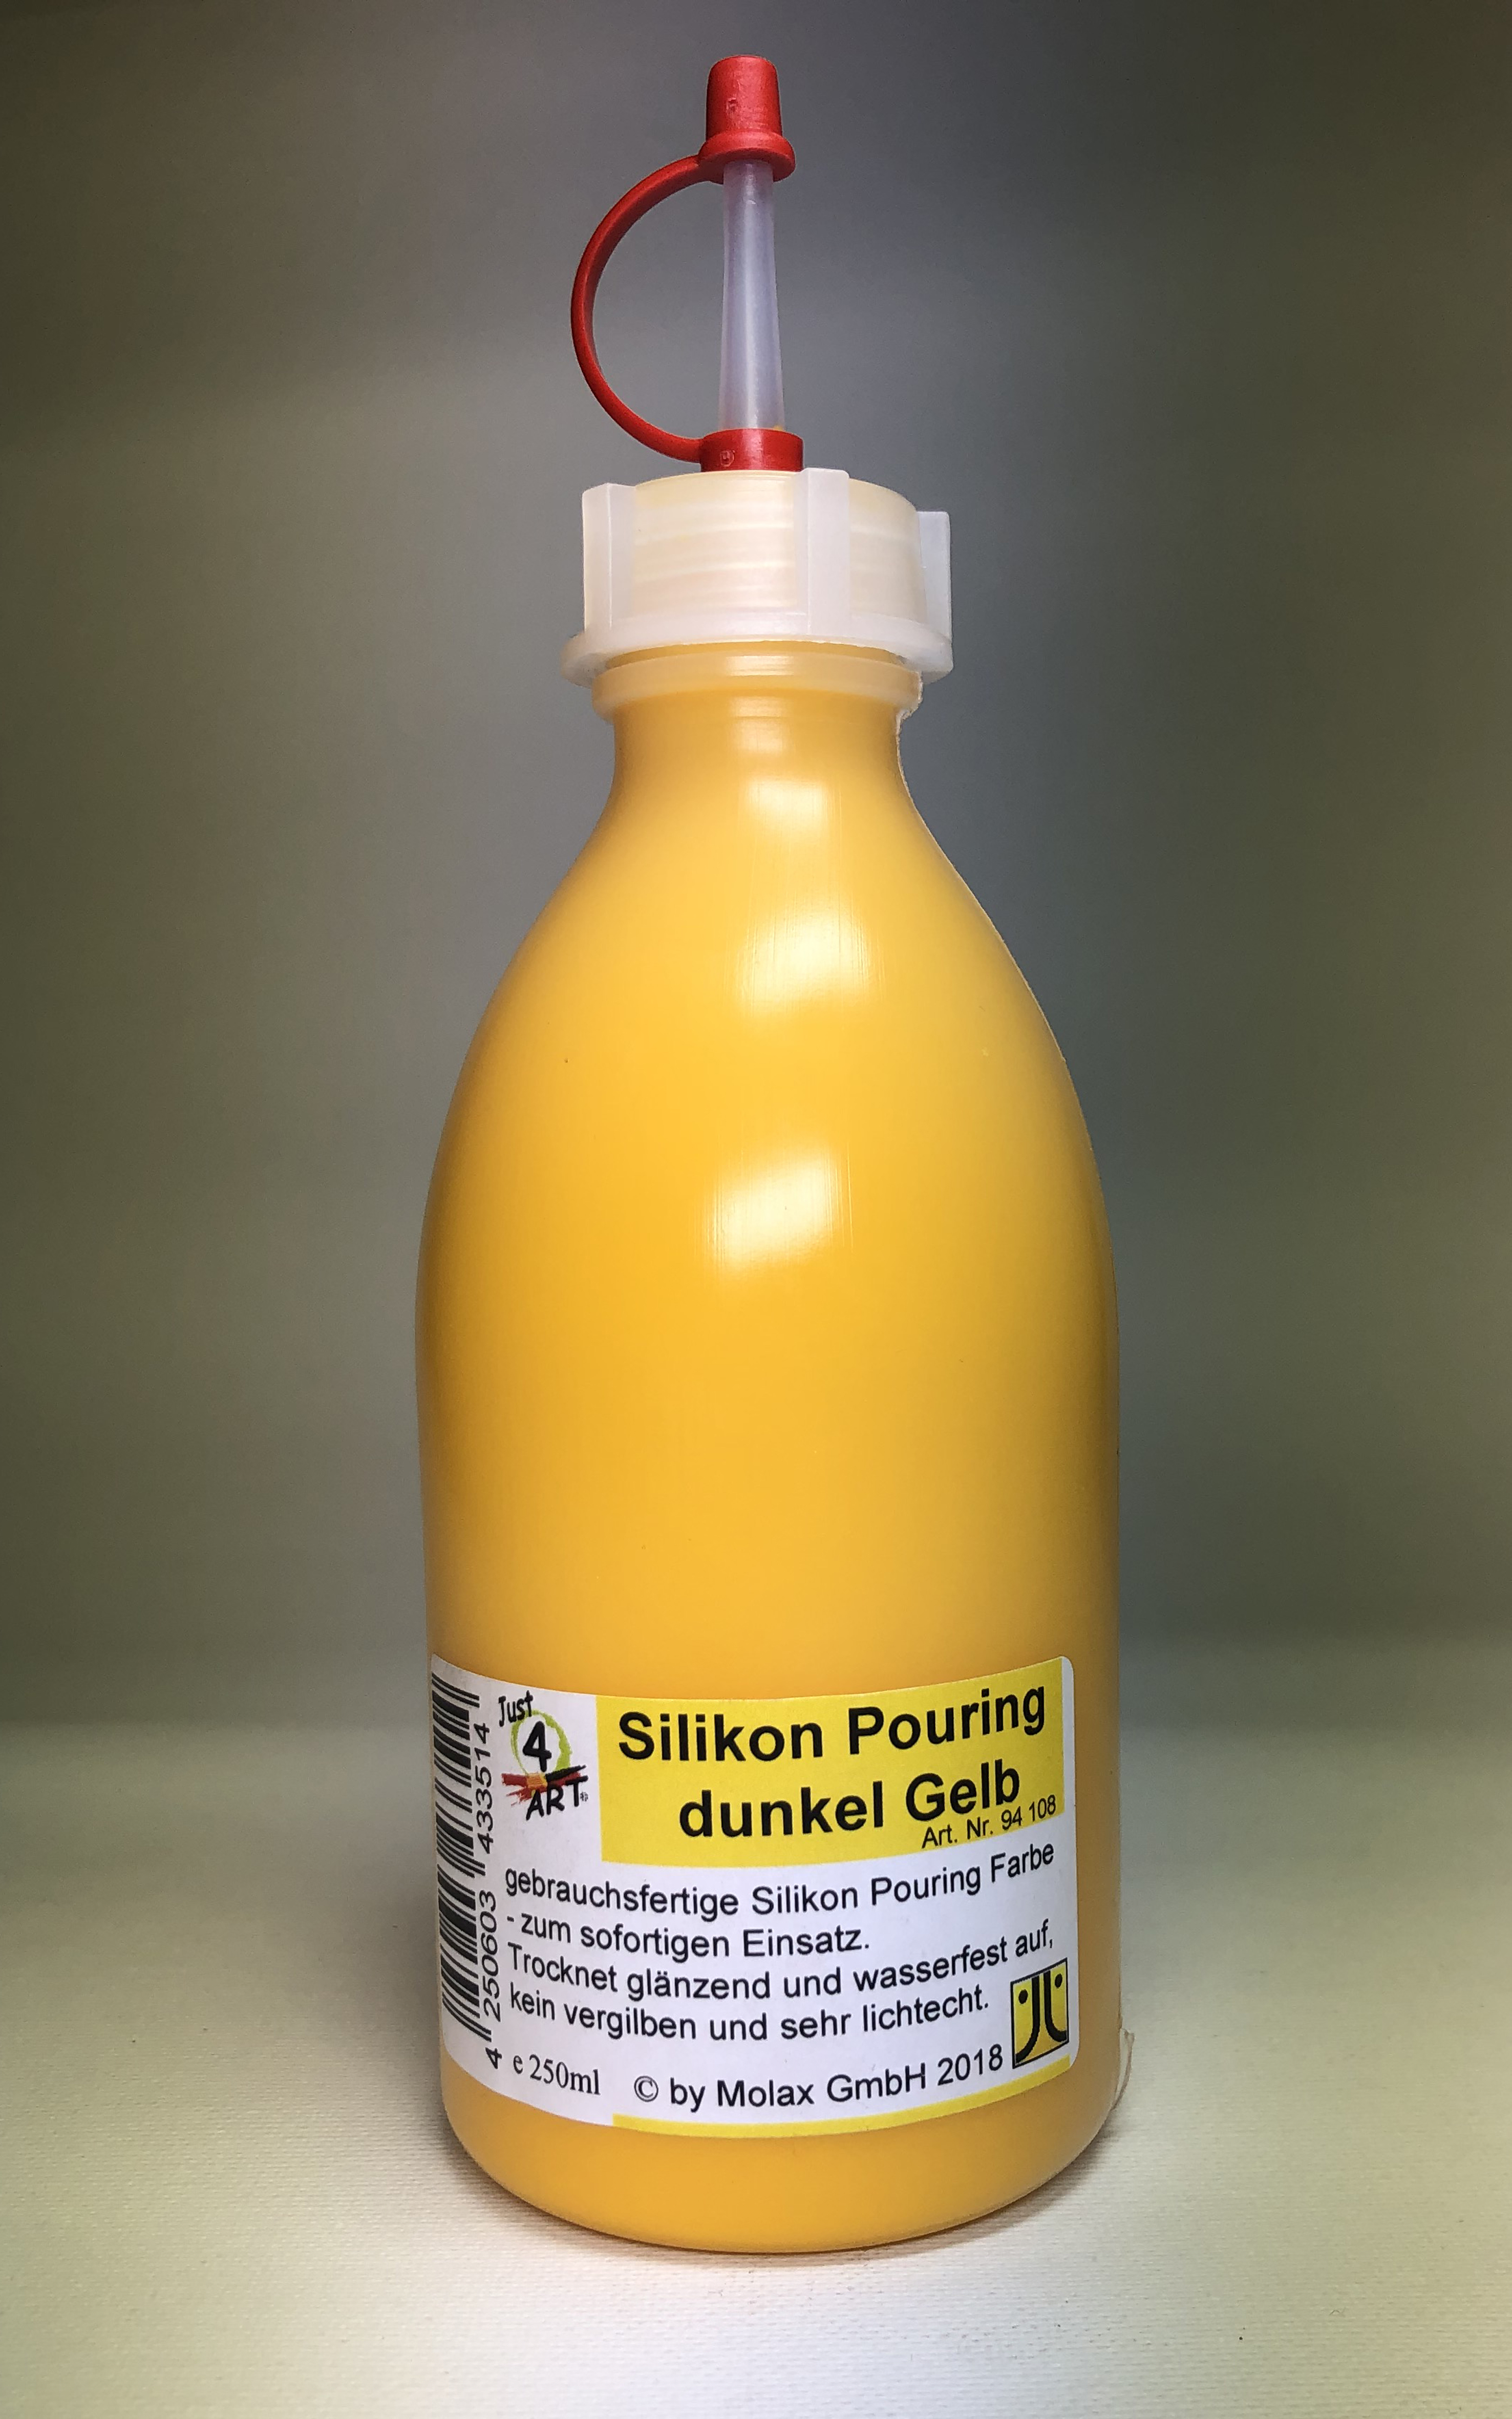 Silicon Pouring 250ml Gelb dunkel